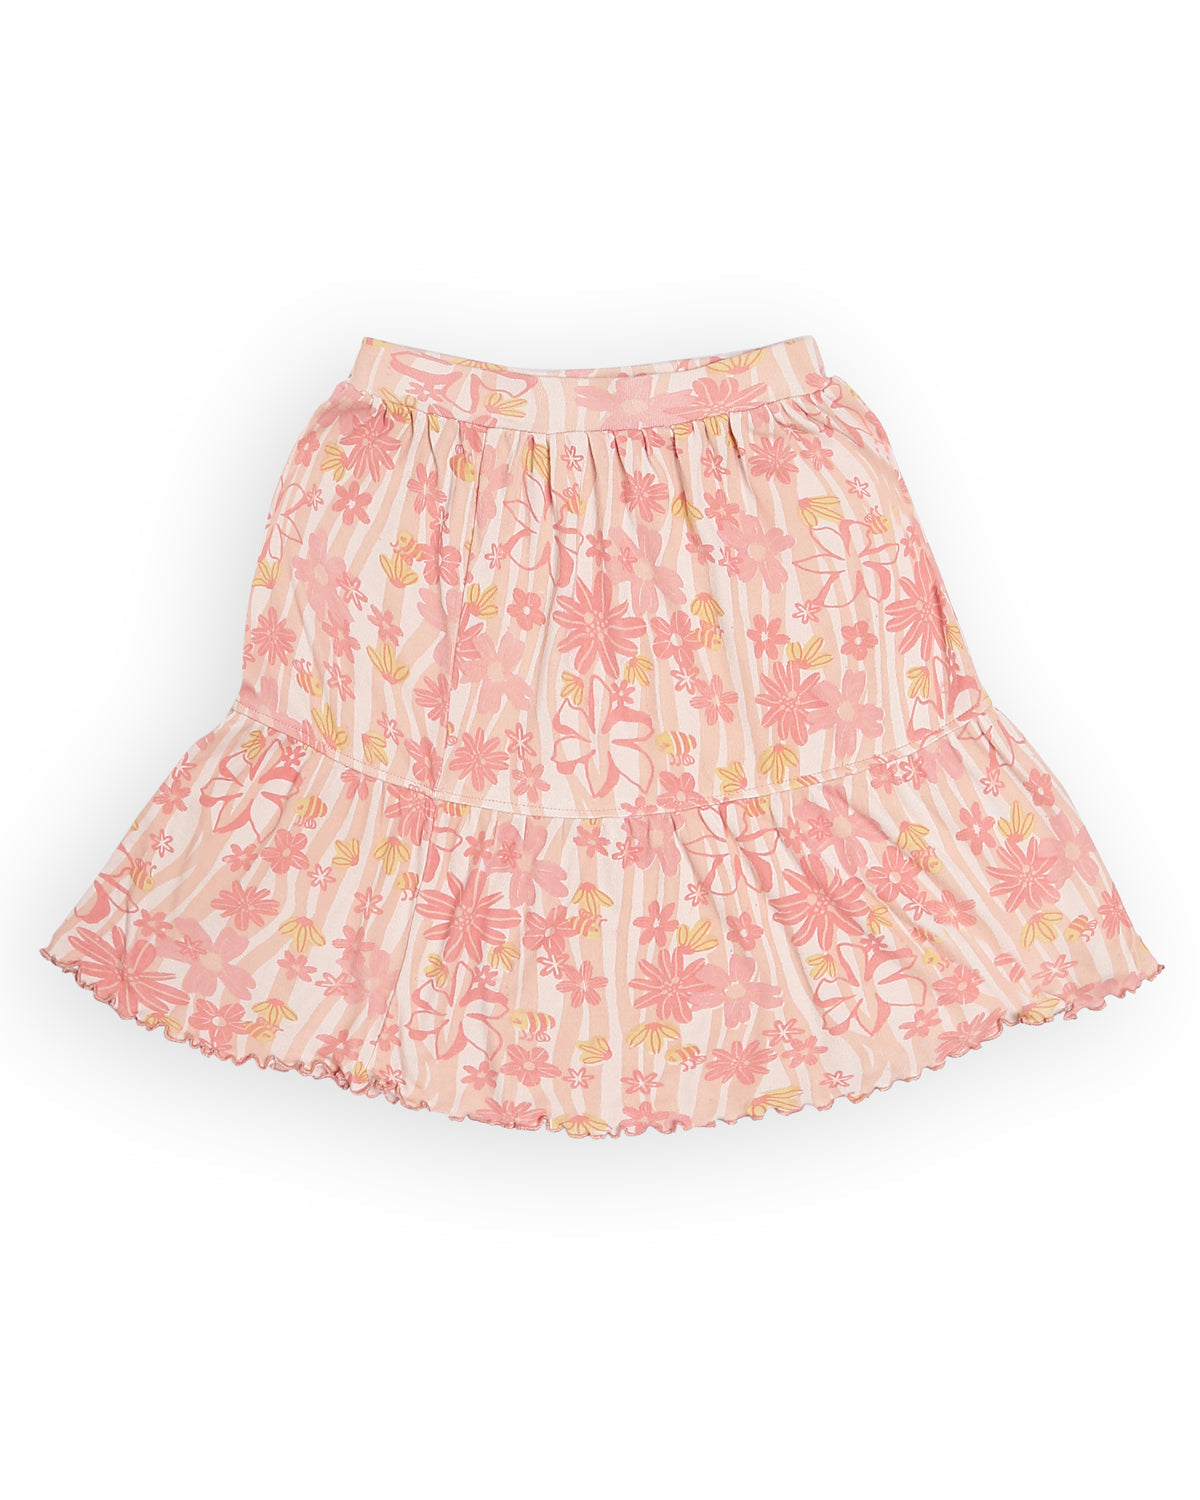 Blooming Nectar Floral Pink Skirt | Rescue